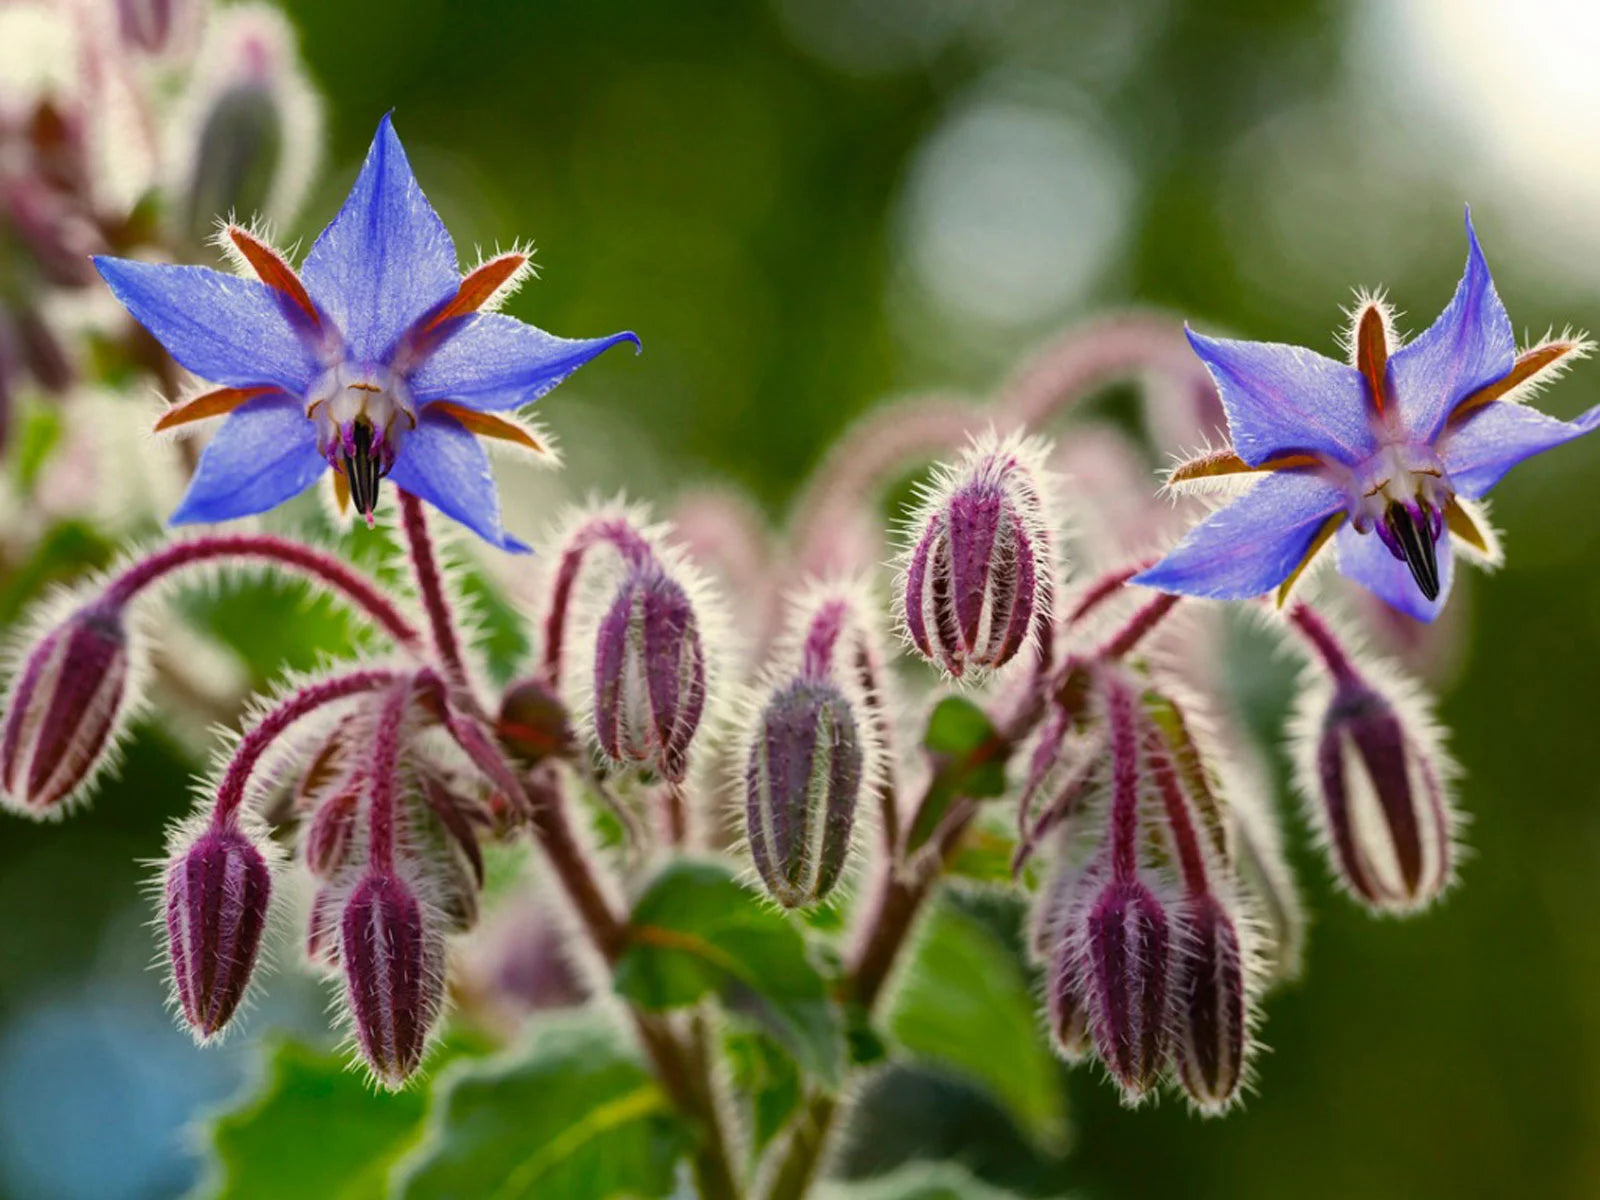 "The Borage and Litsea Body Butter: A Luxurious Treat for Dehydrated and Mature Skin"